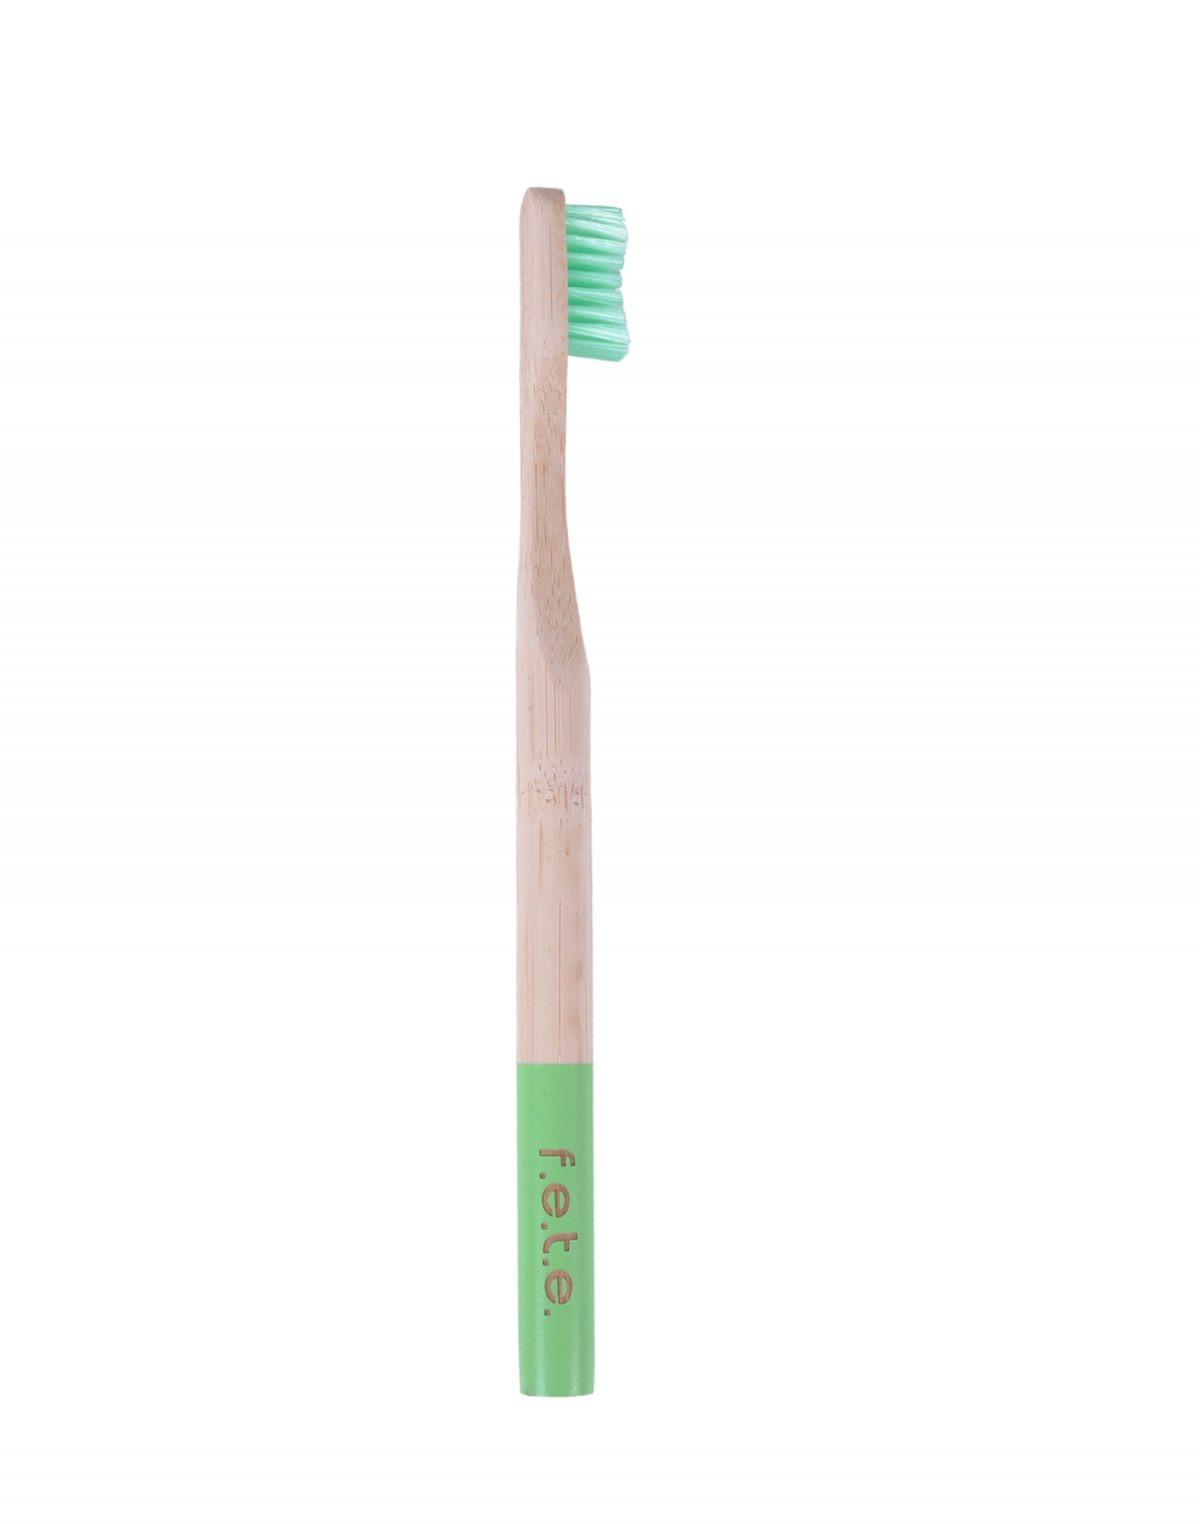 Single Firm Toothbrush